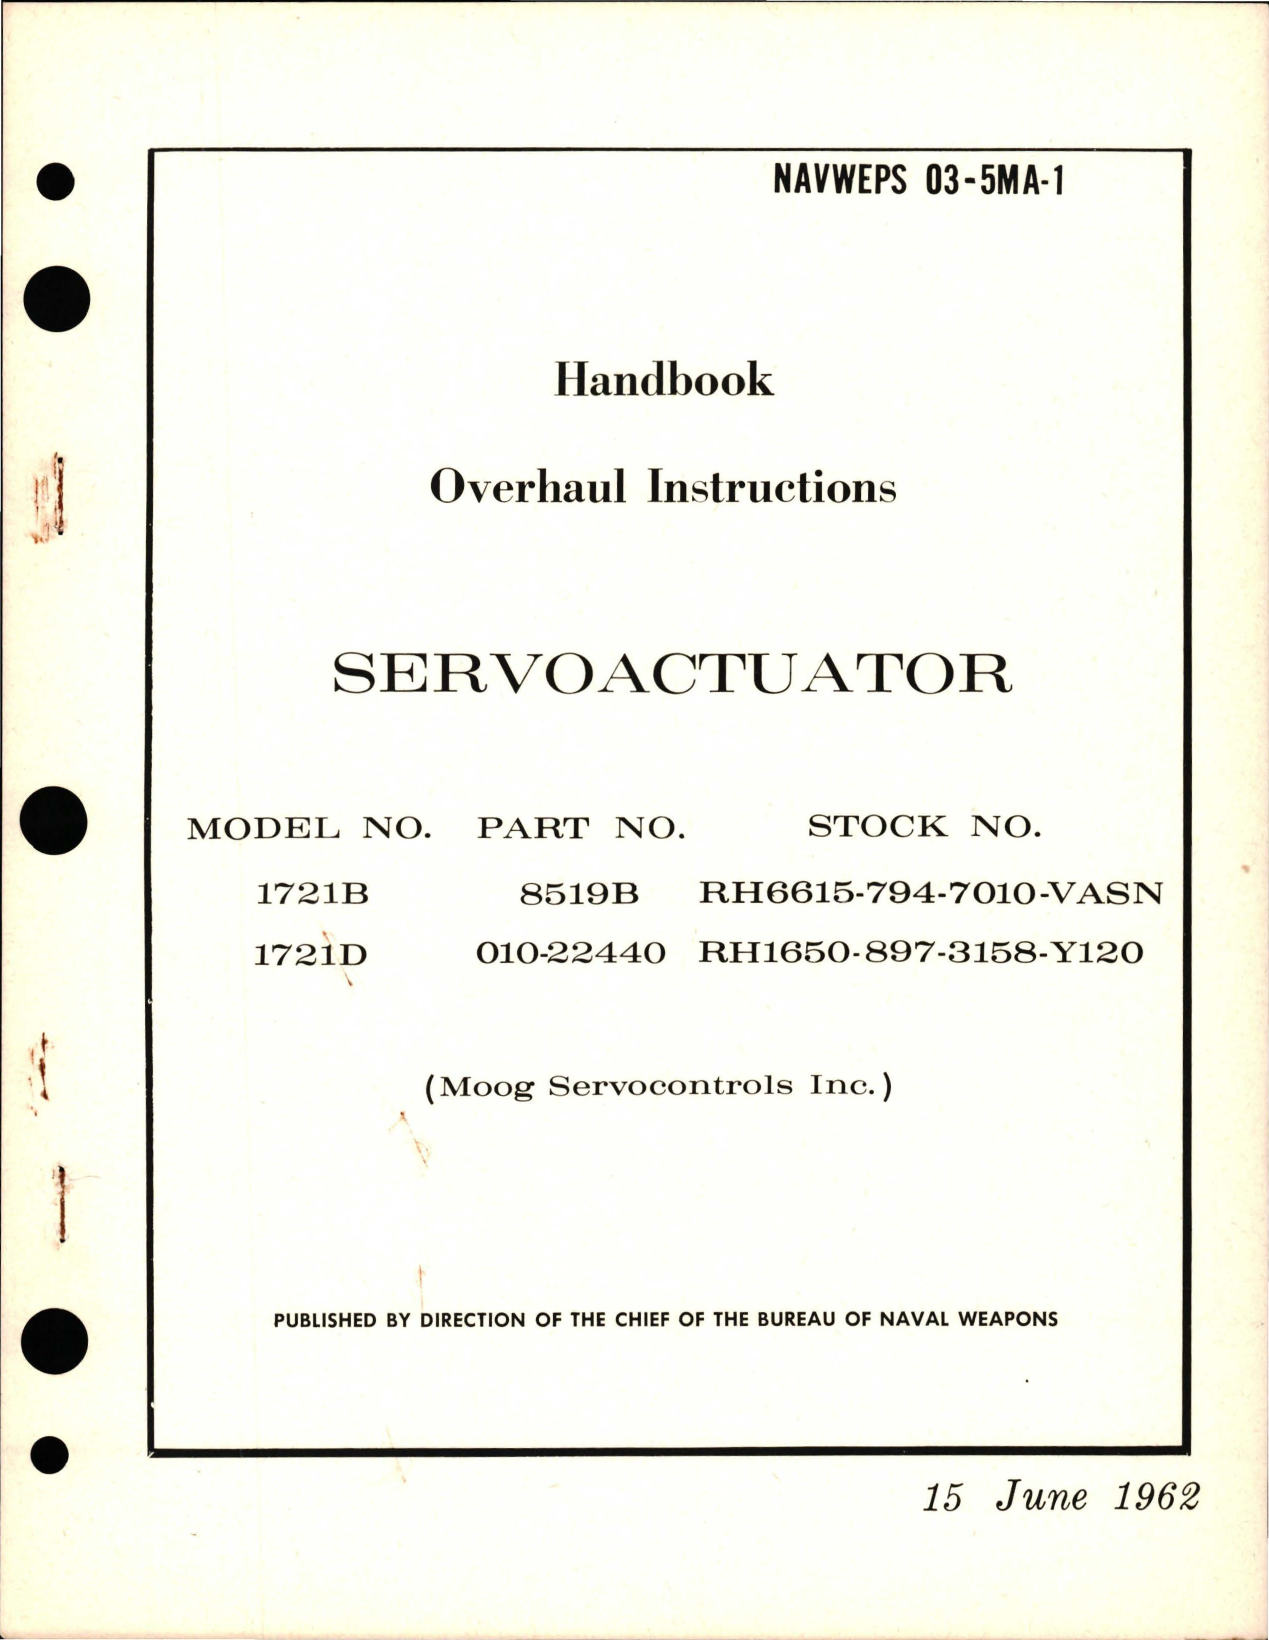 Sample page 1 from AirCorps Library document: Overhaul Instructions for Servoactuator - Models 1721B and 1721D 